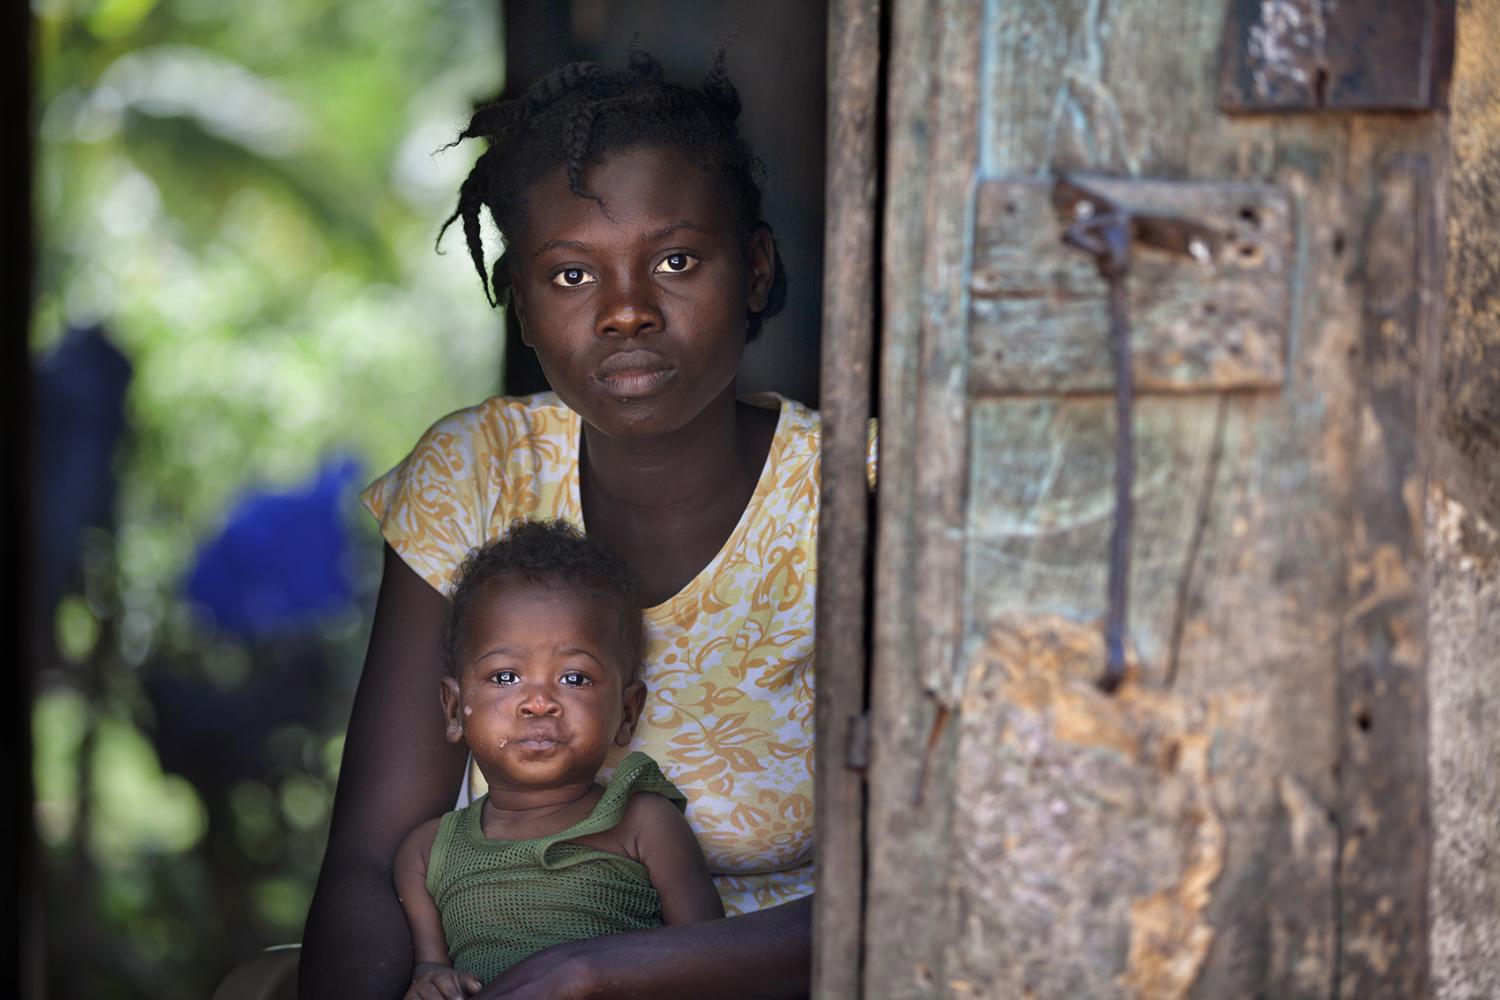 A woman and her baby sit in the doorway of their home in Milot, Haiti.